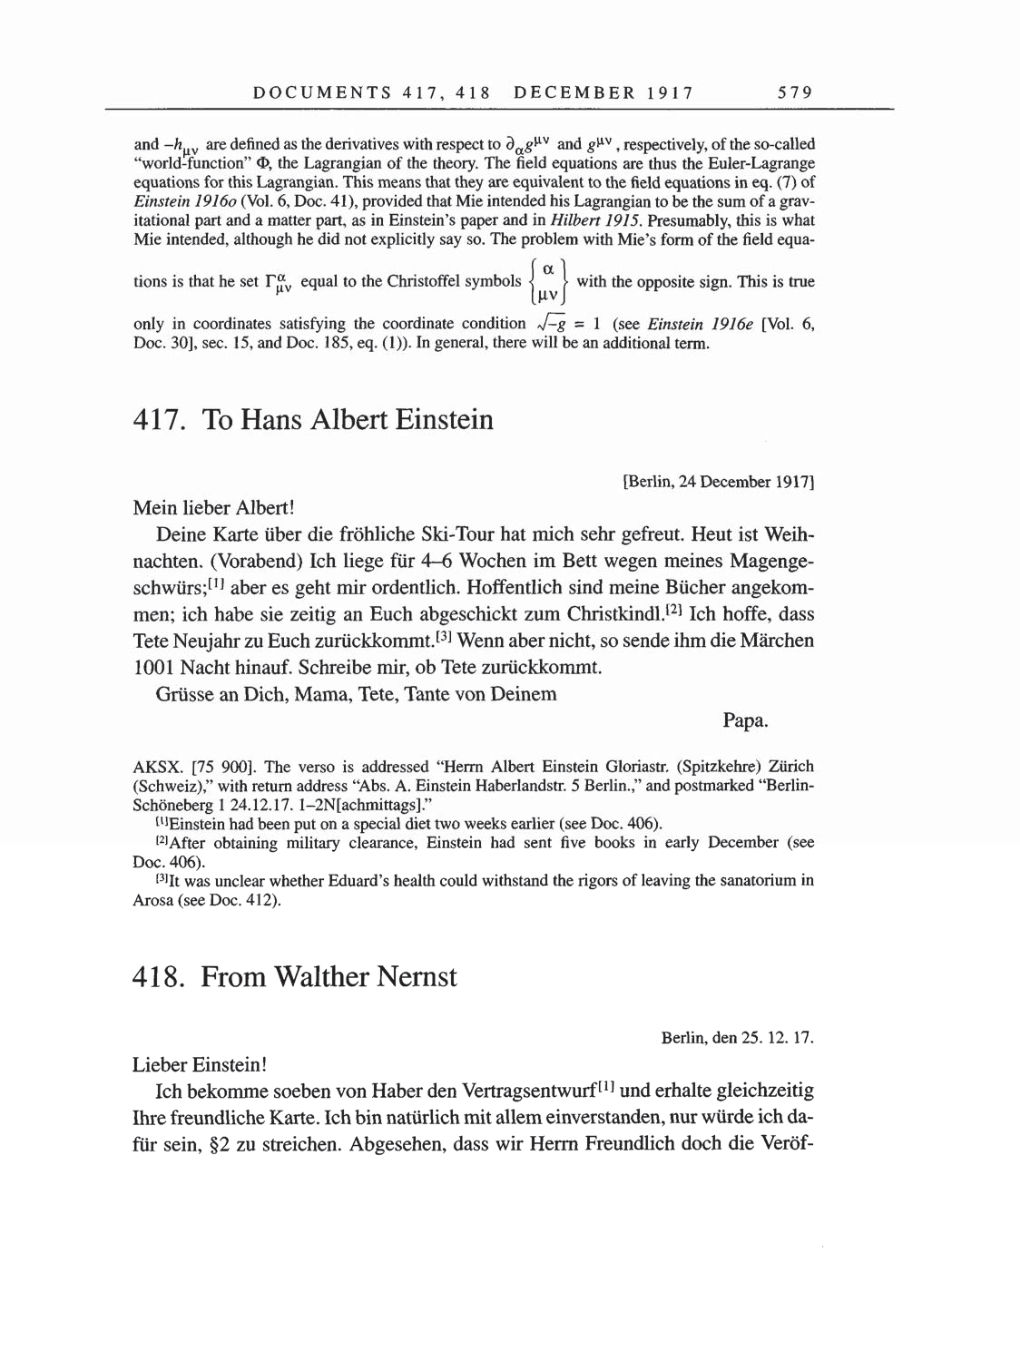 Volume 8, Part A: The Berlin Years: Correspondence 1914-1917 page 579